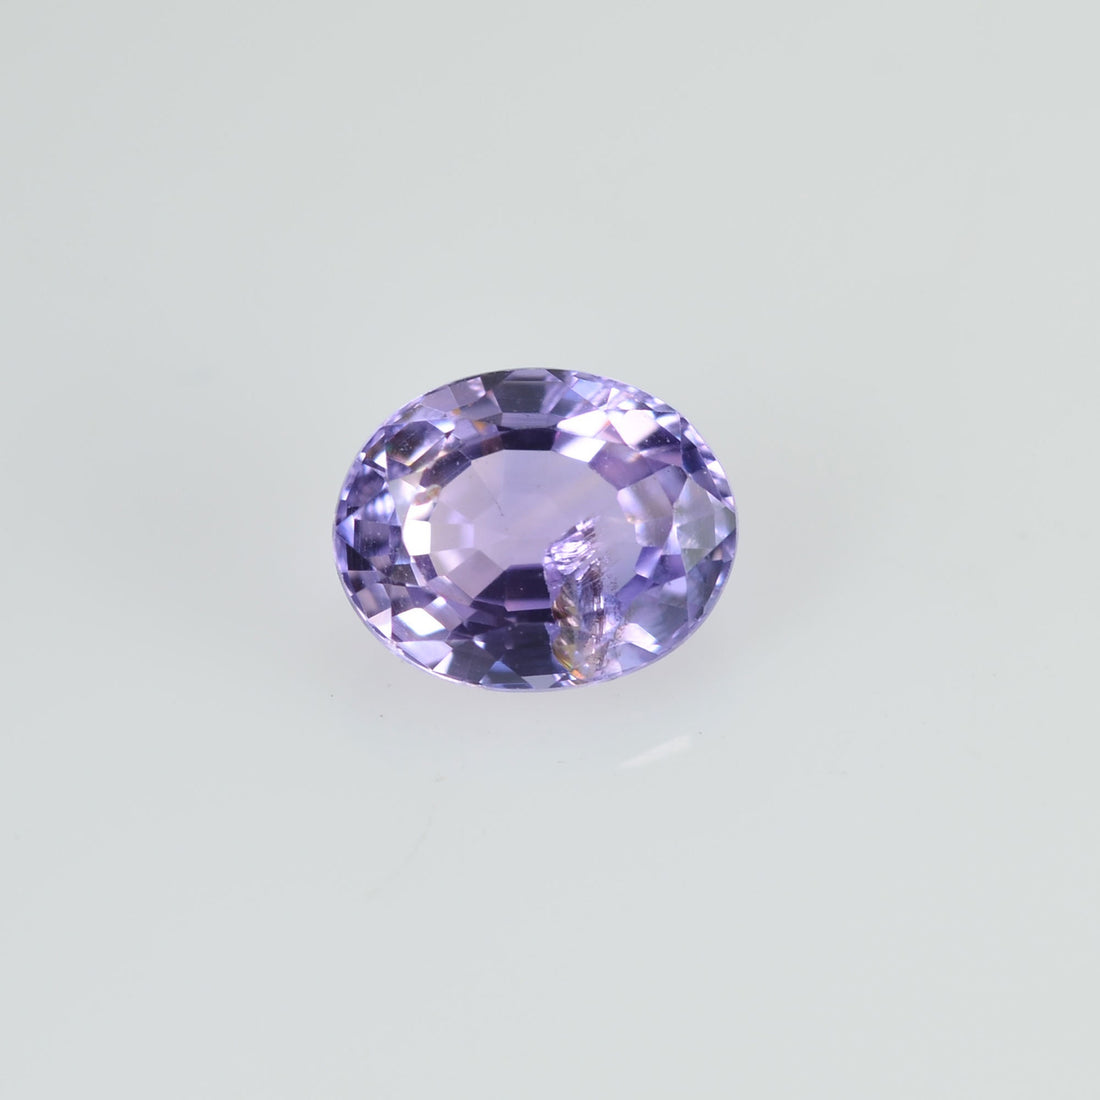 0.48 cts Natural Lavender Sapphire Loose Gemstone Oval Cut